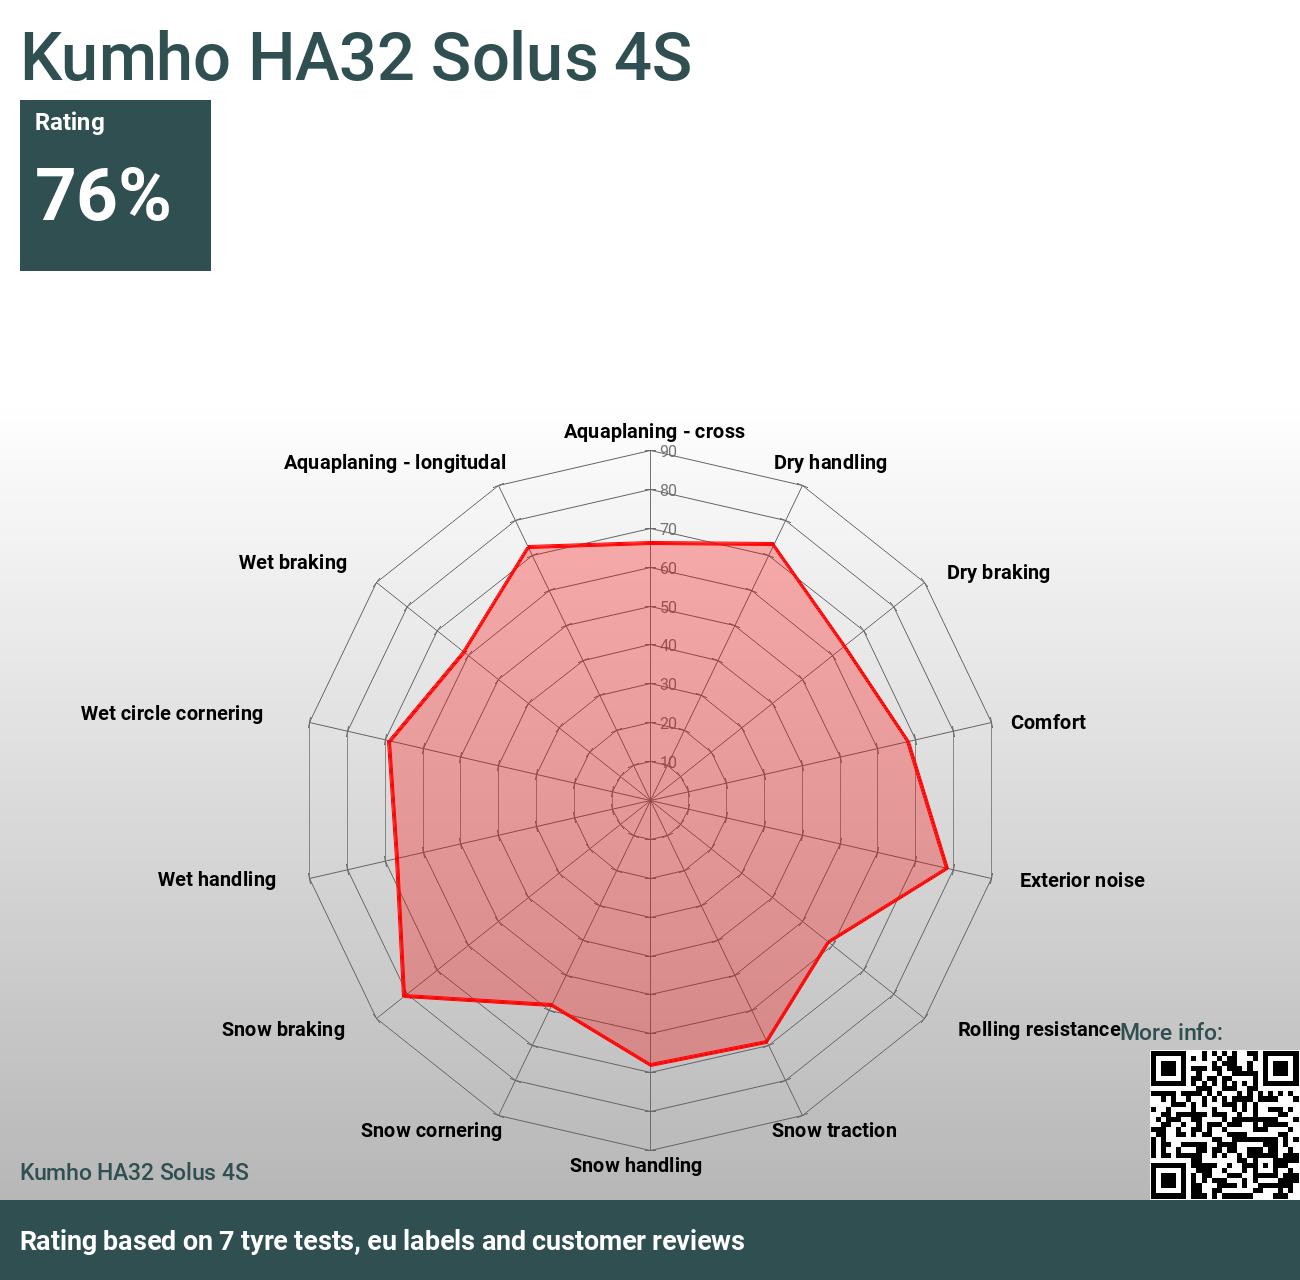 Kumho HA32 Solus 4S and 2024 - tests Reviews